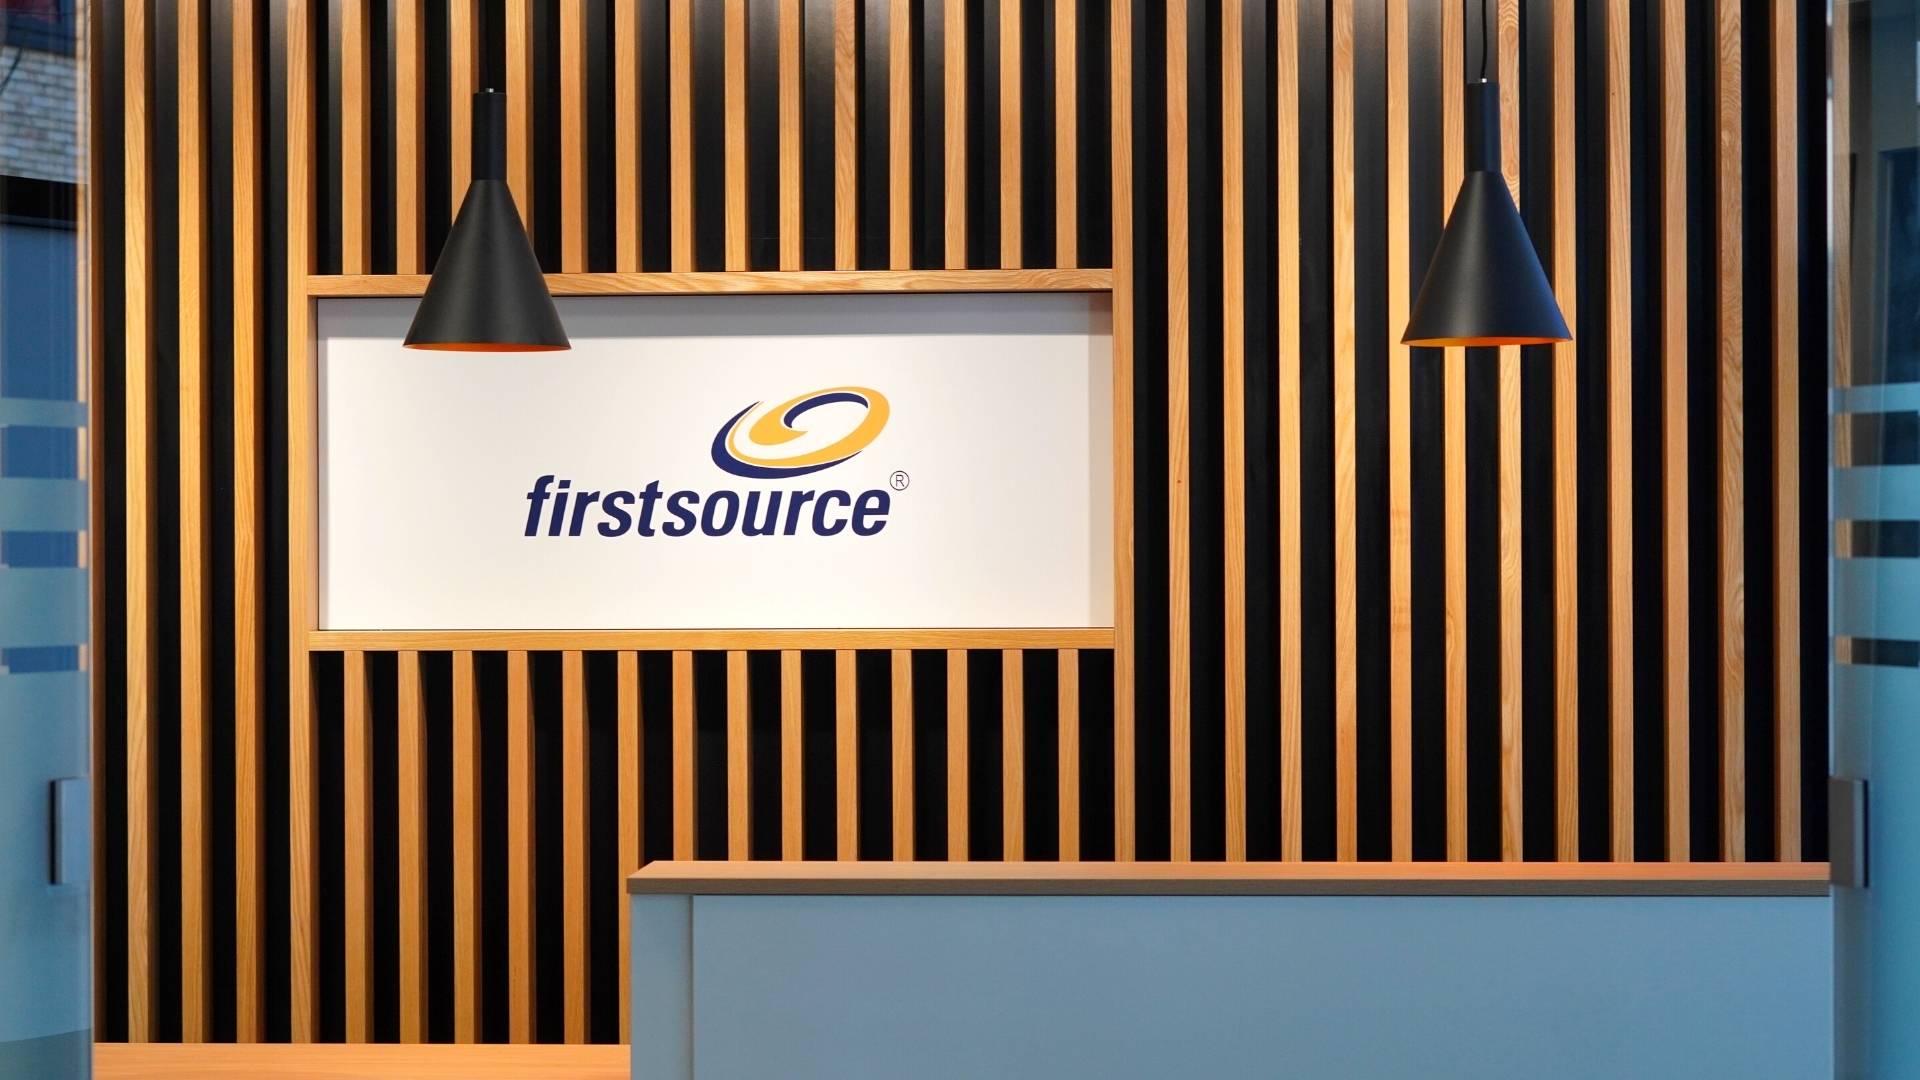 Firstsource Wales